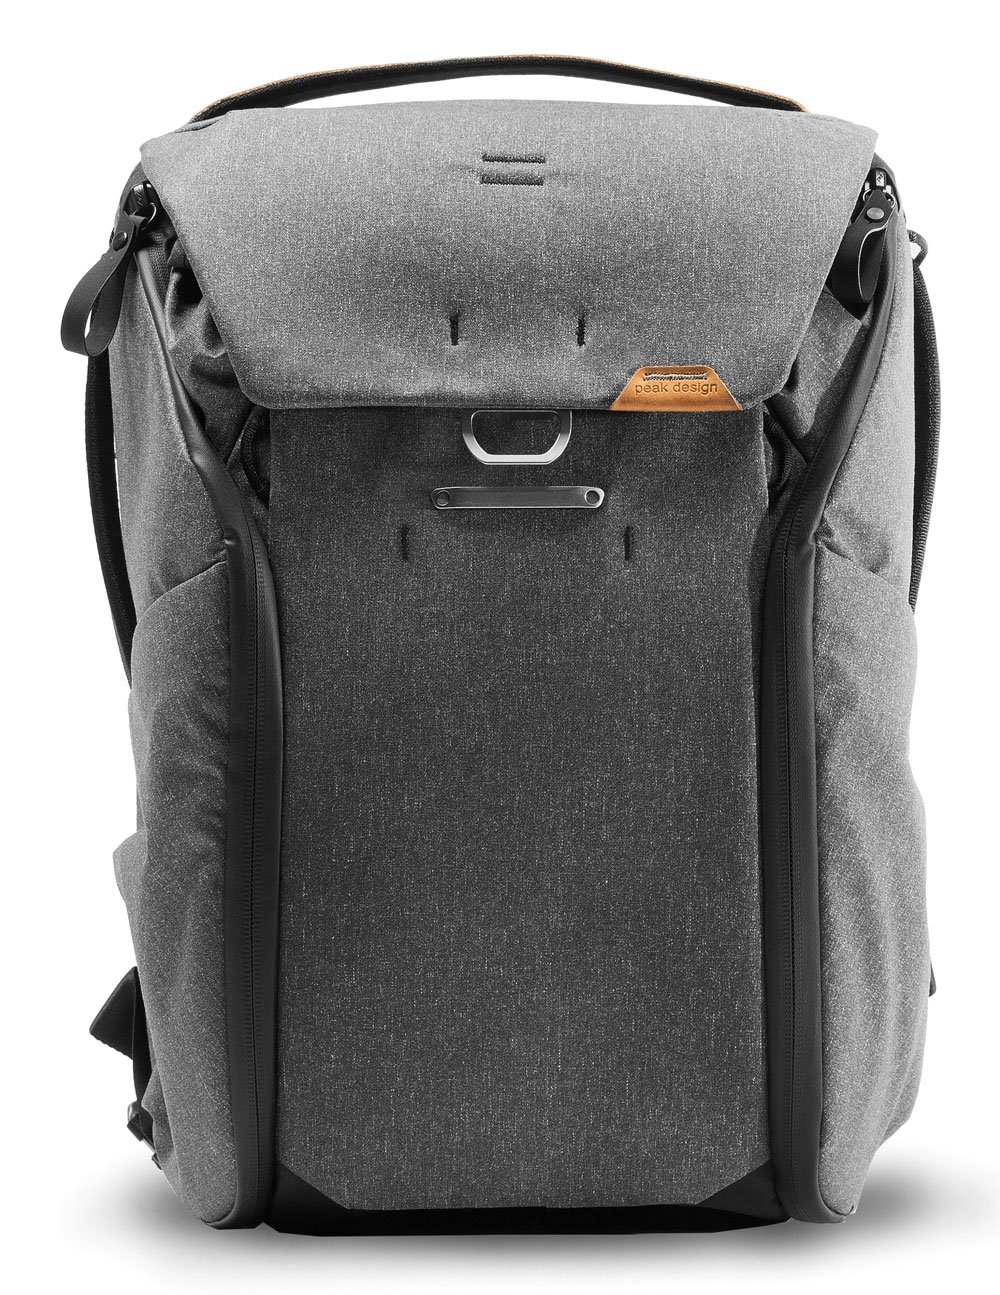 Photography gear storage backpack